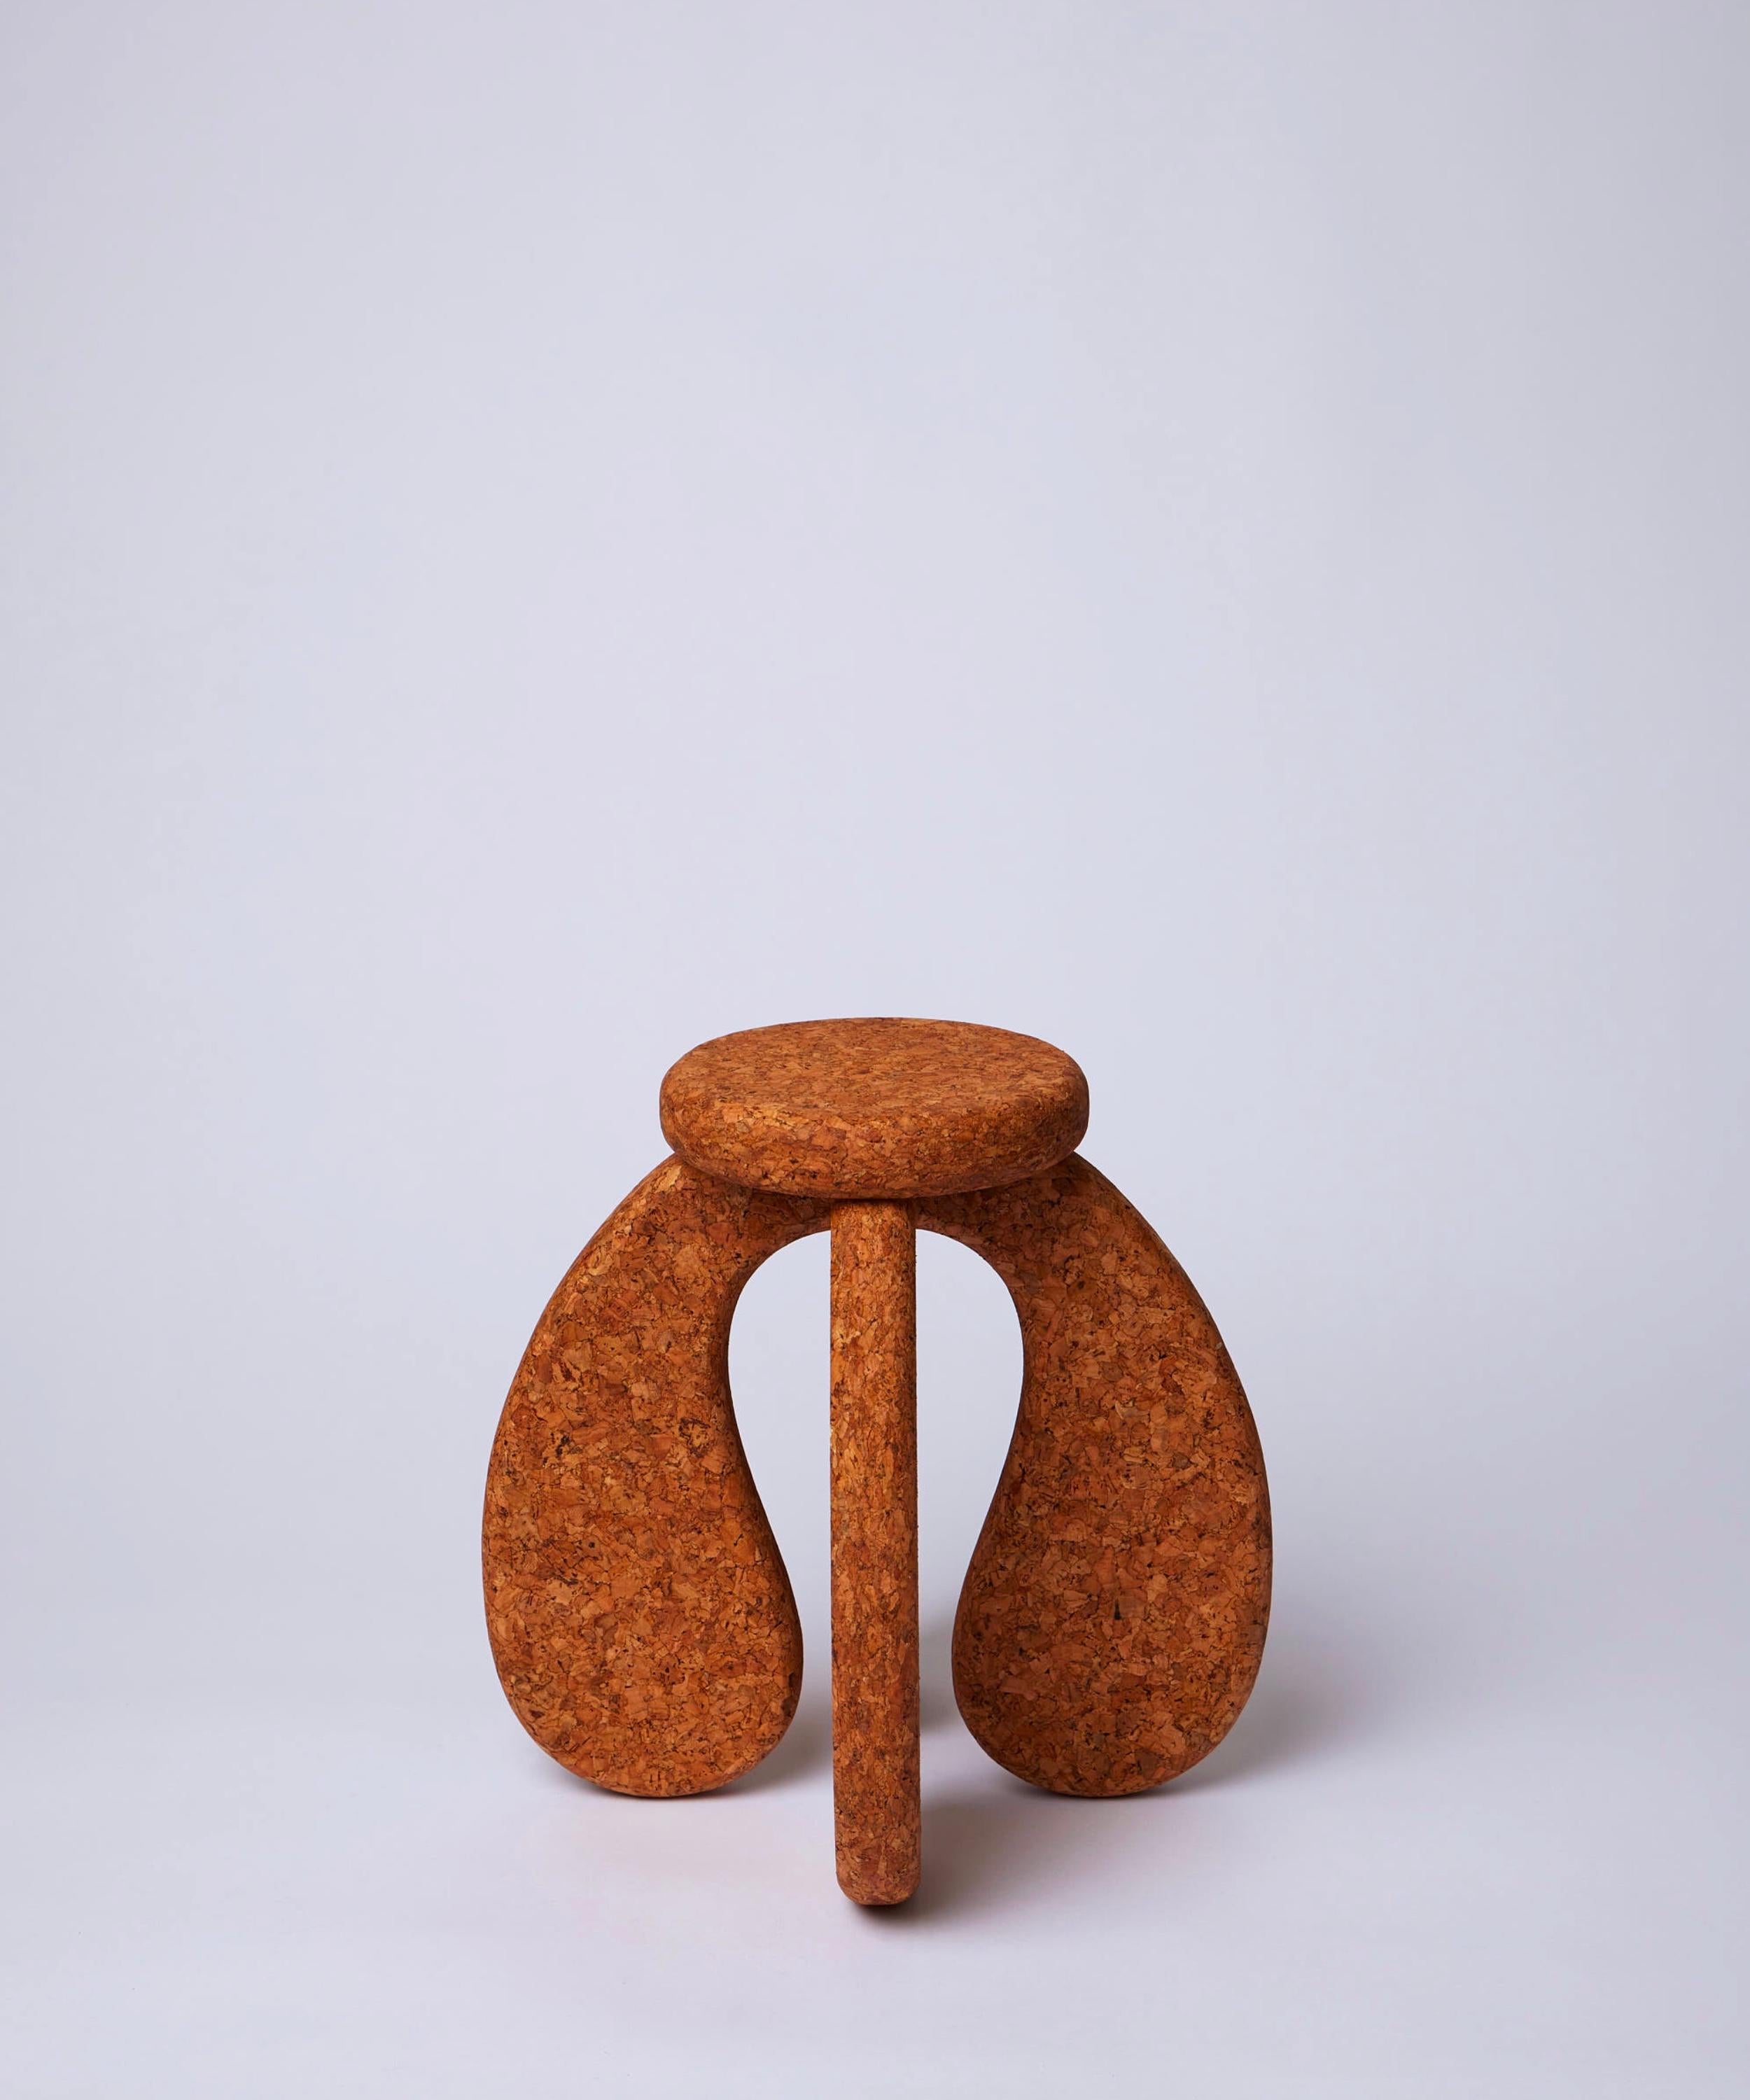 (Cork plant stand old as individual item, not set of 2)

The SPACE miniature gets reimagined in Cork This spongey yet sturdy material adds a playful lightweight aspect to the design. Suitable as a plant stand or decorative object. No